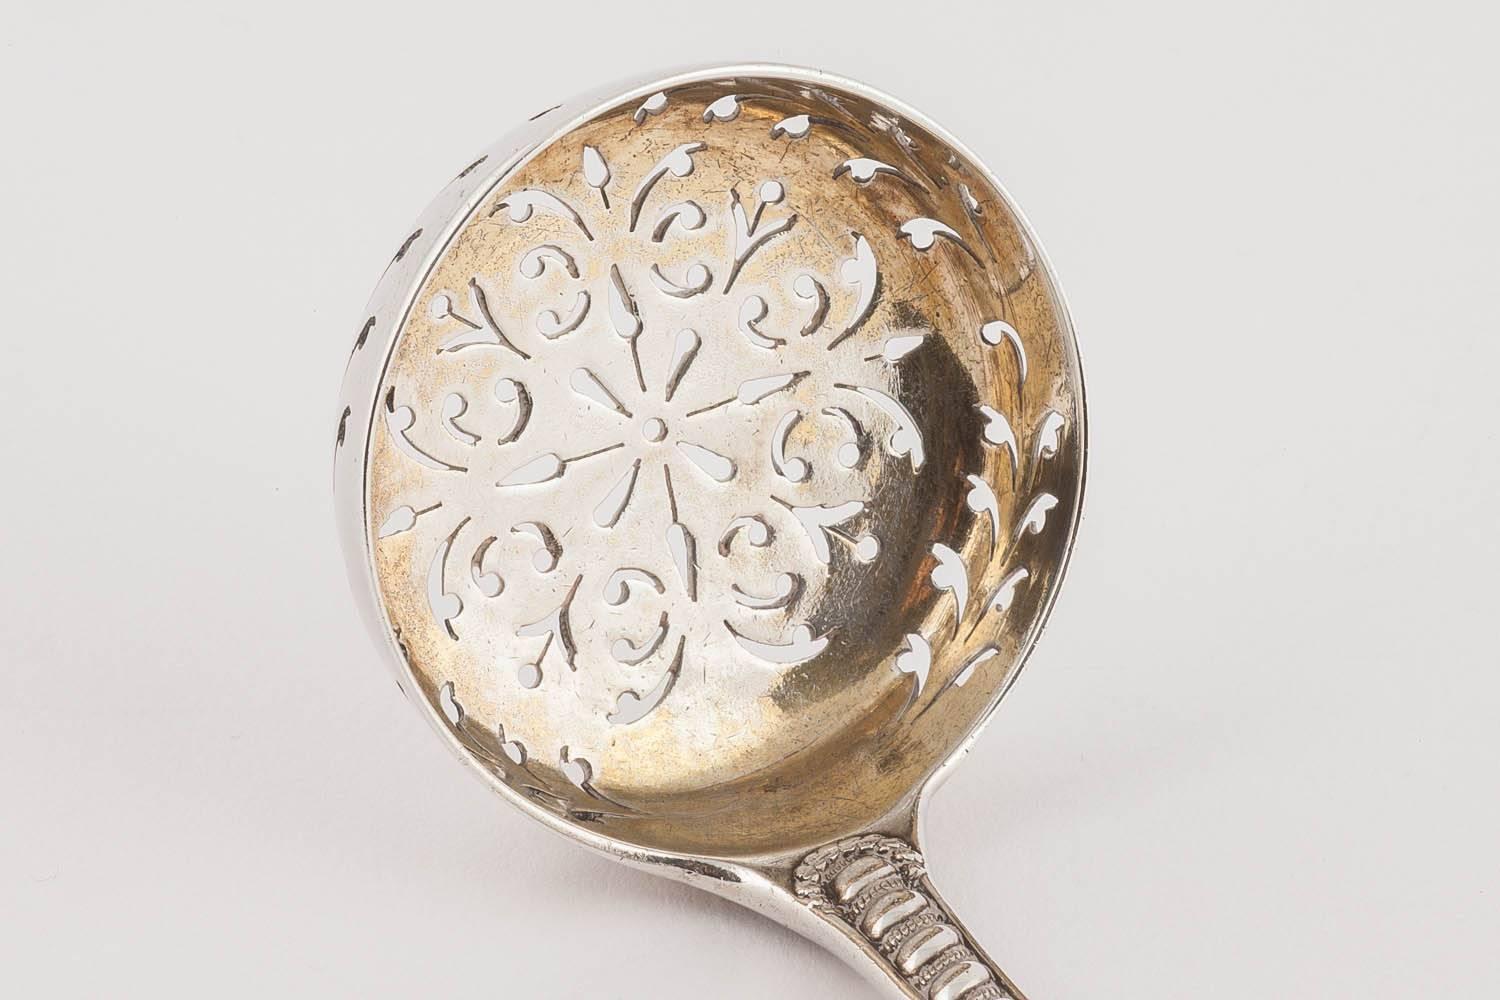 A beautiful pairing: the sterling silver spoon with a gilded interior pierced with a decorative foliate design, with pair of sugar tongs, en suite, Napier Pattern.

By George Adams, London 1864, hallmarked. Monogrammed

The spoon: 6 in. (15.2 cm.)